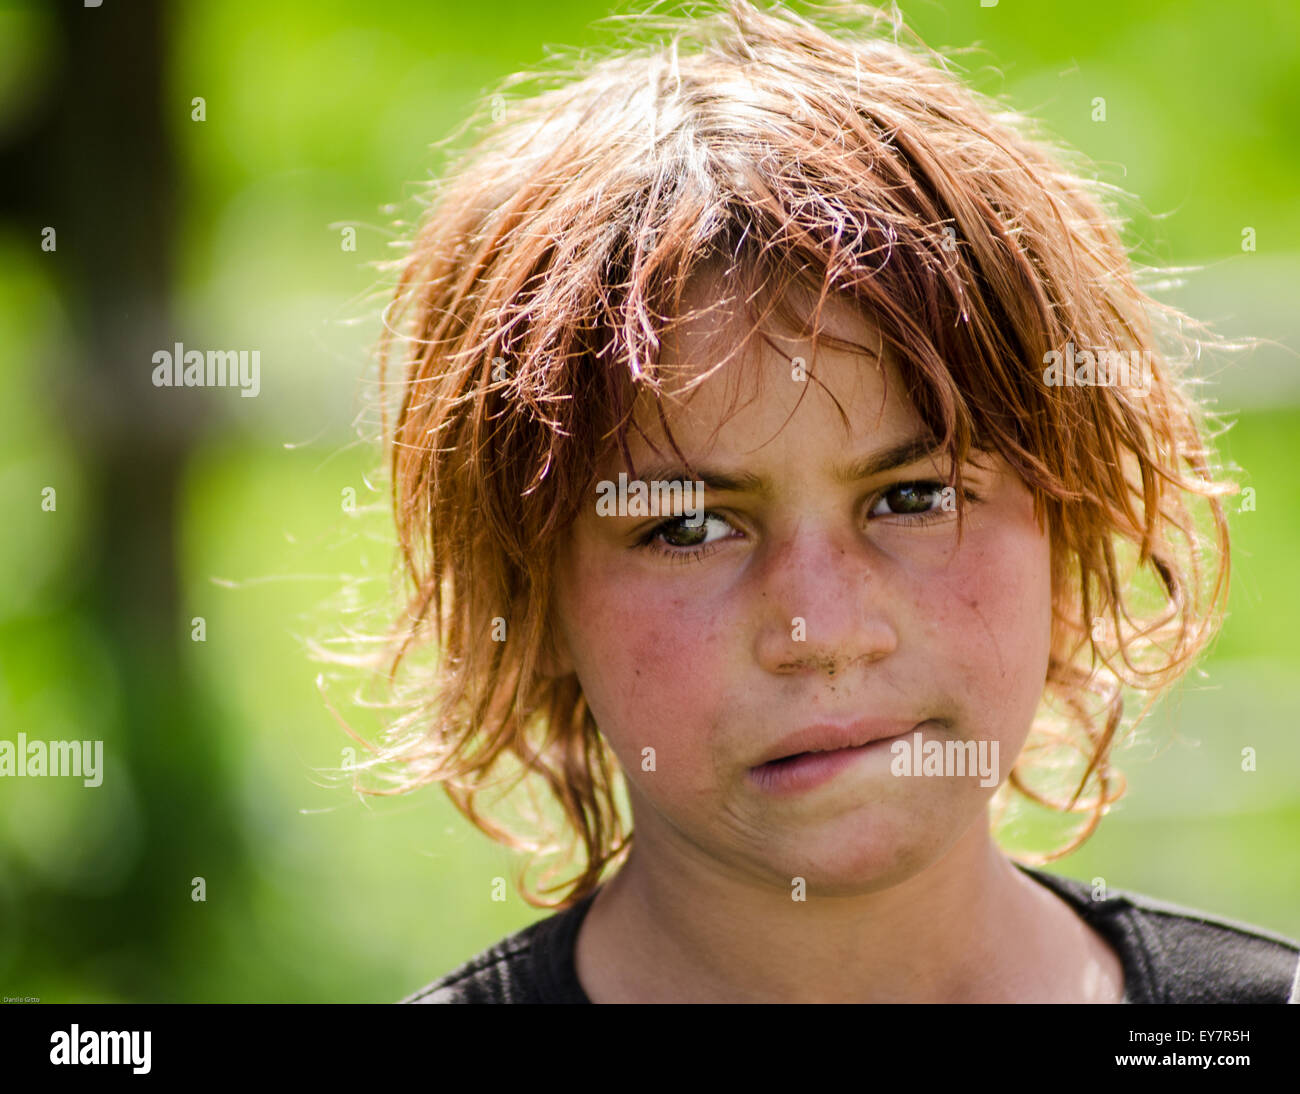 Gypsy in romanian countryside Stock Photo